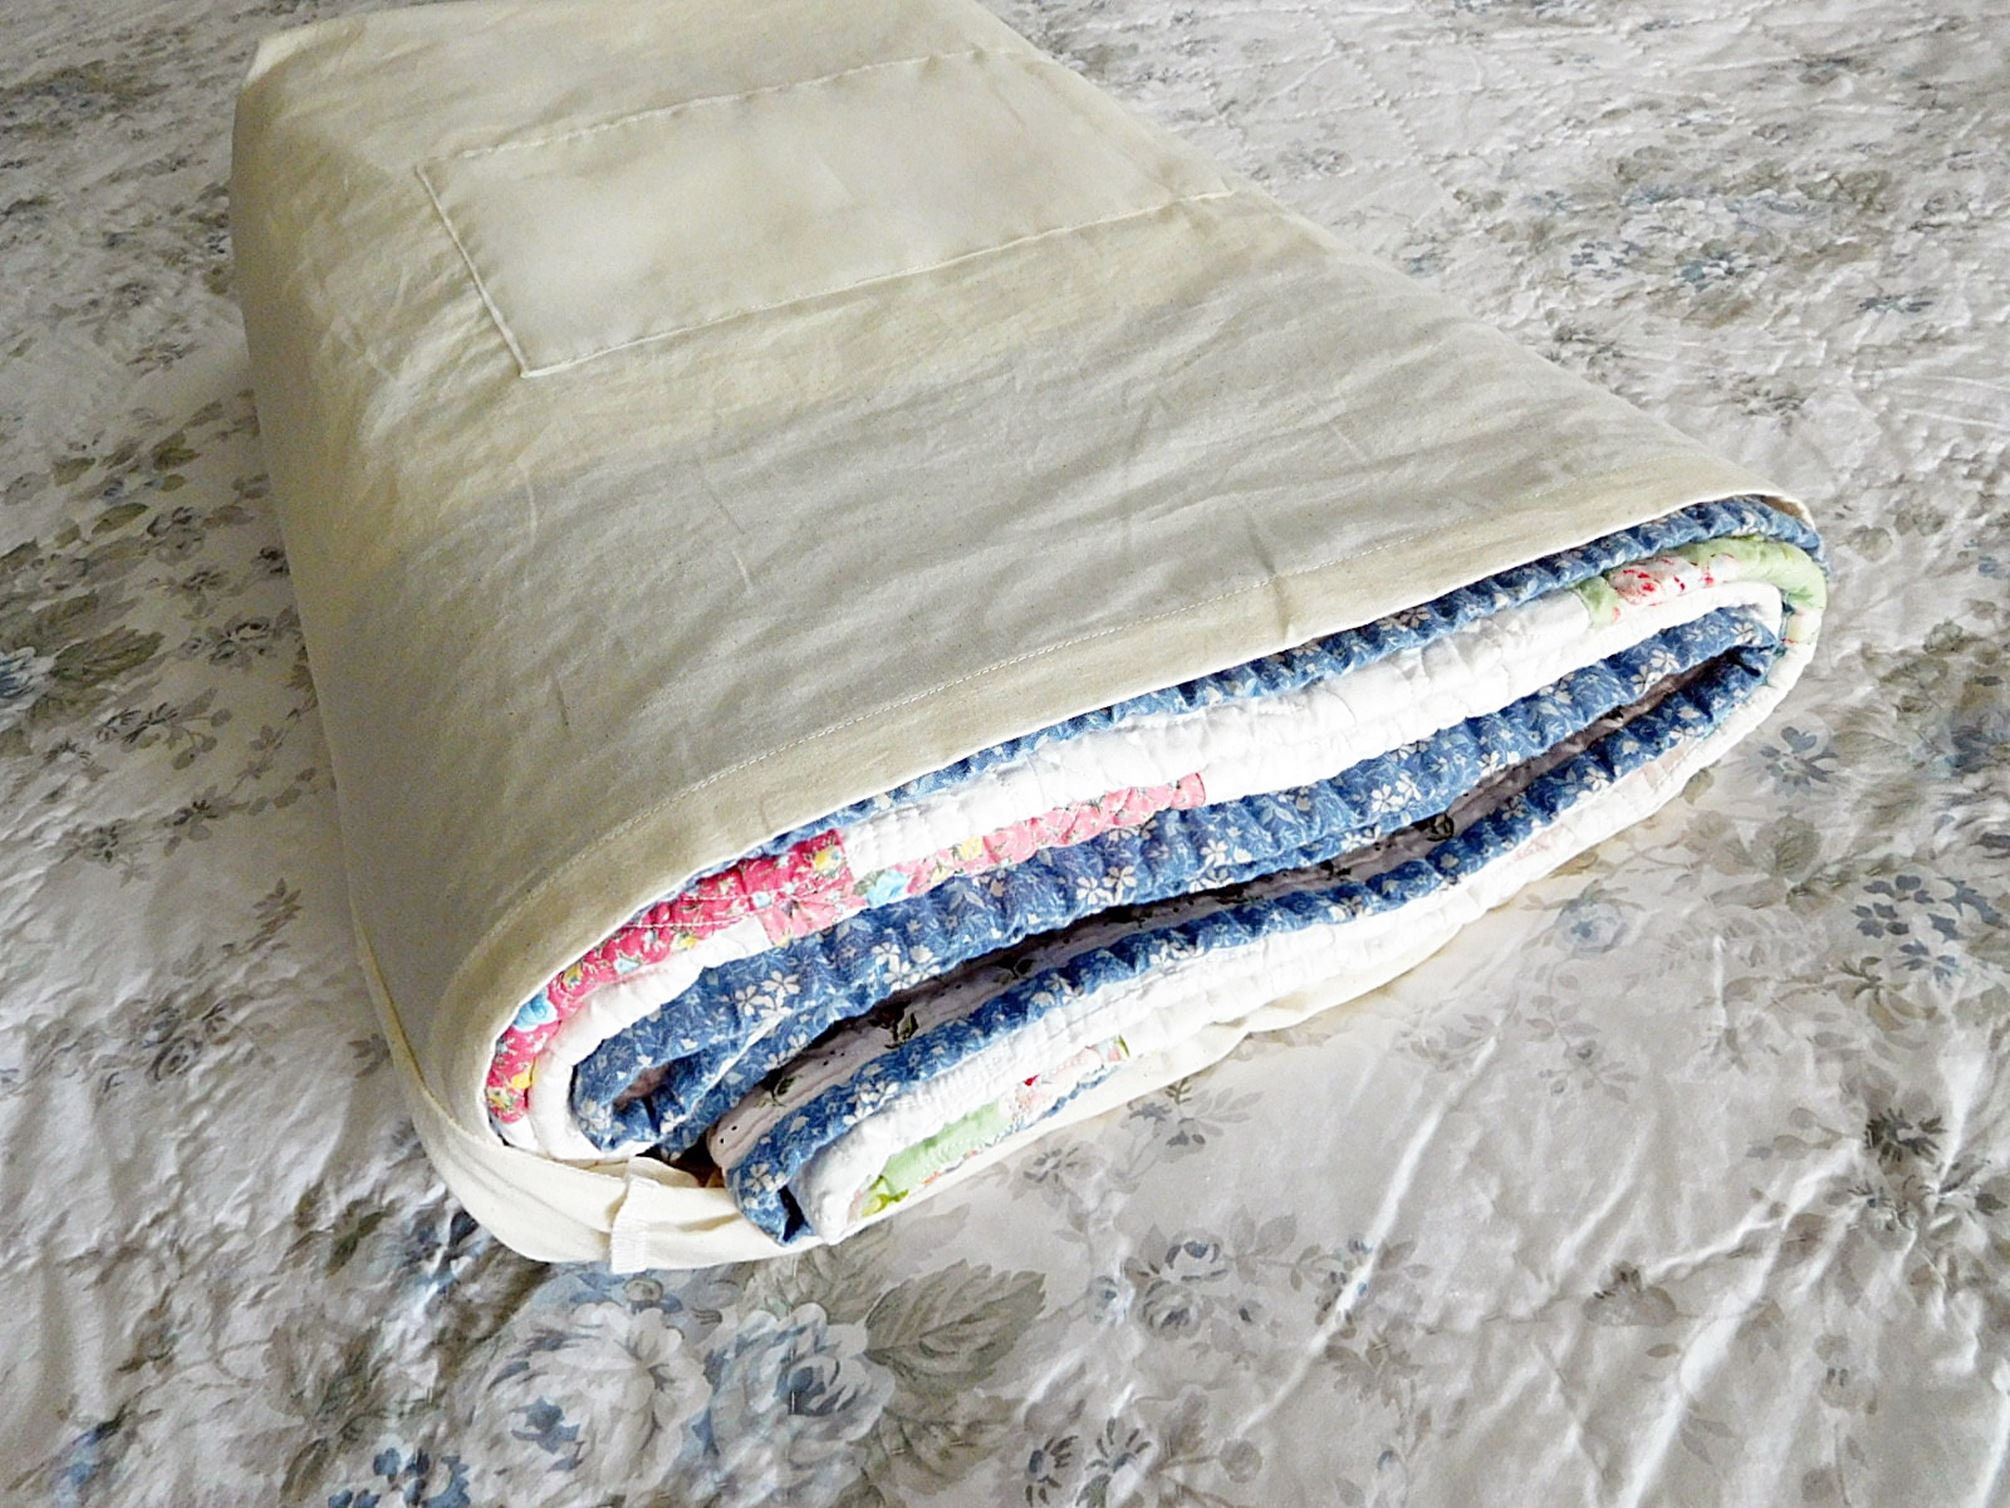 Archival Quality Pillow Storage Bags Handmade Cotton Designed 